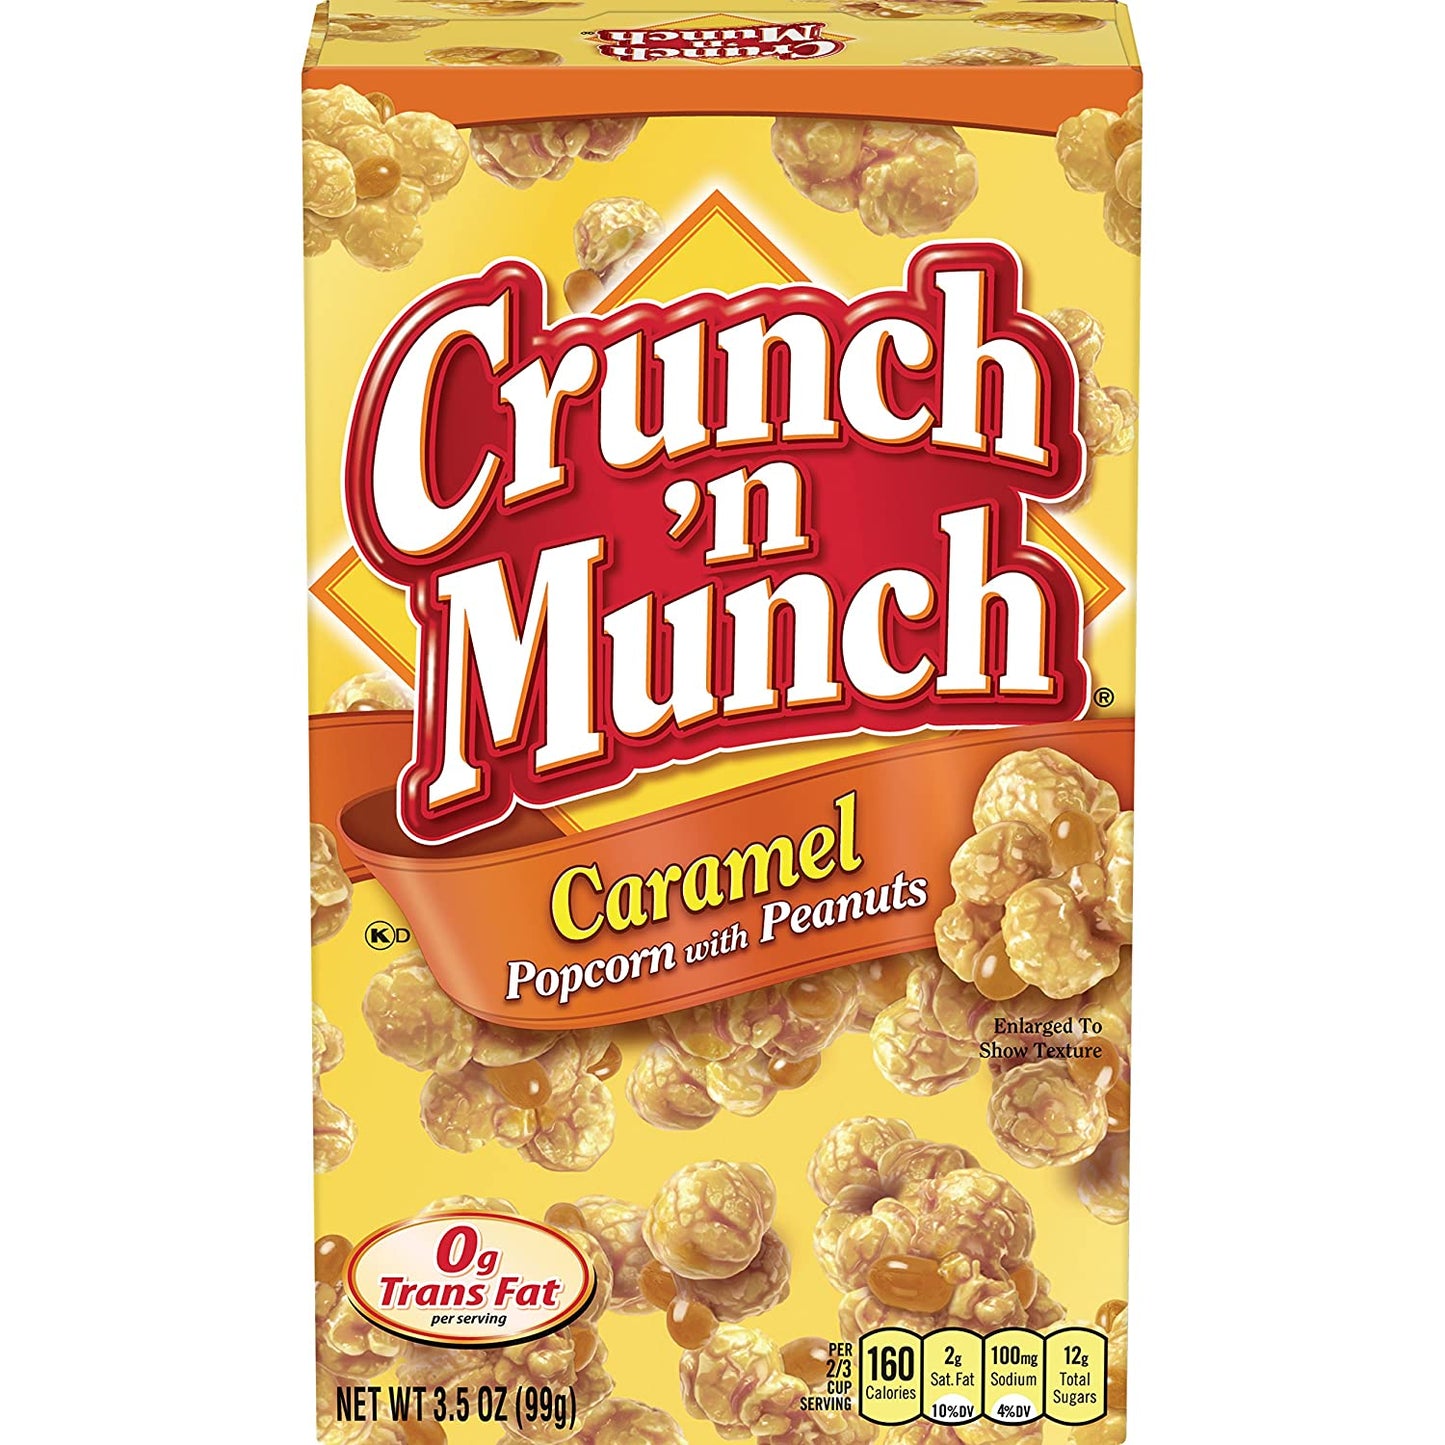 CRUNCH 'N MUNCH Caramel Popcorn with Peanuts, 3.5 oz. (Pack of 12)